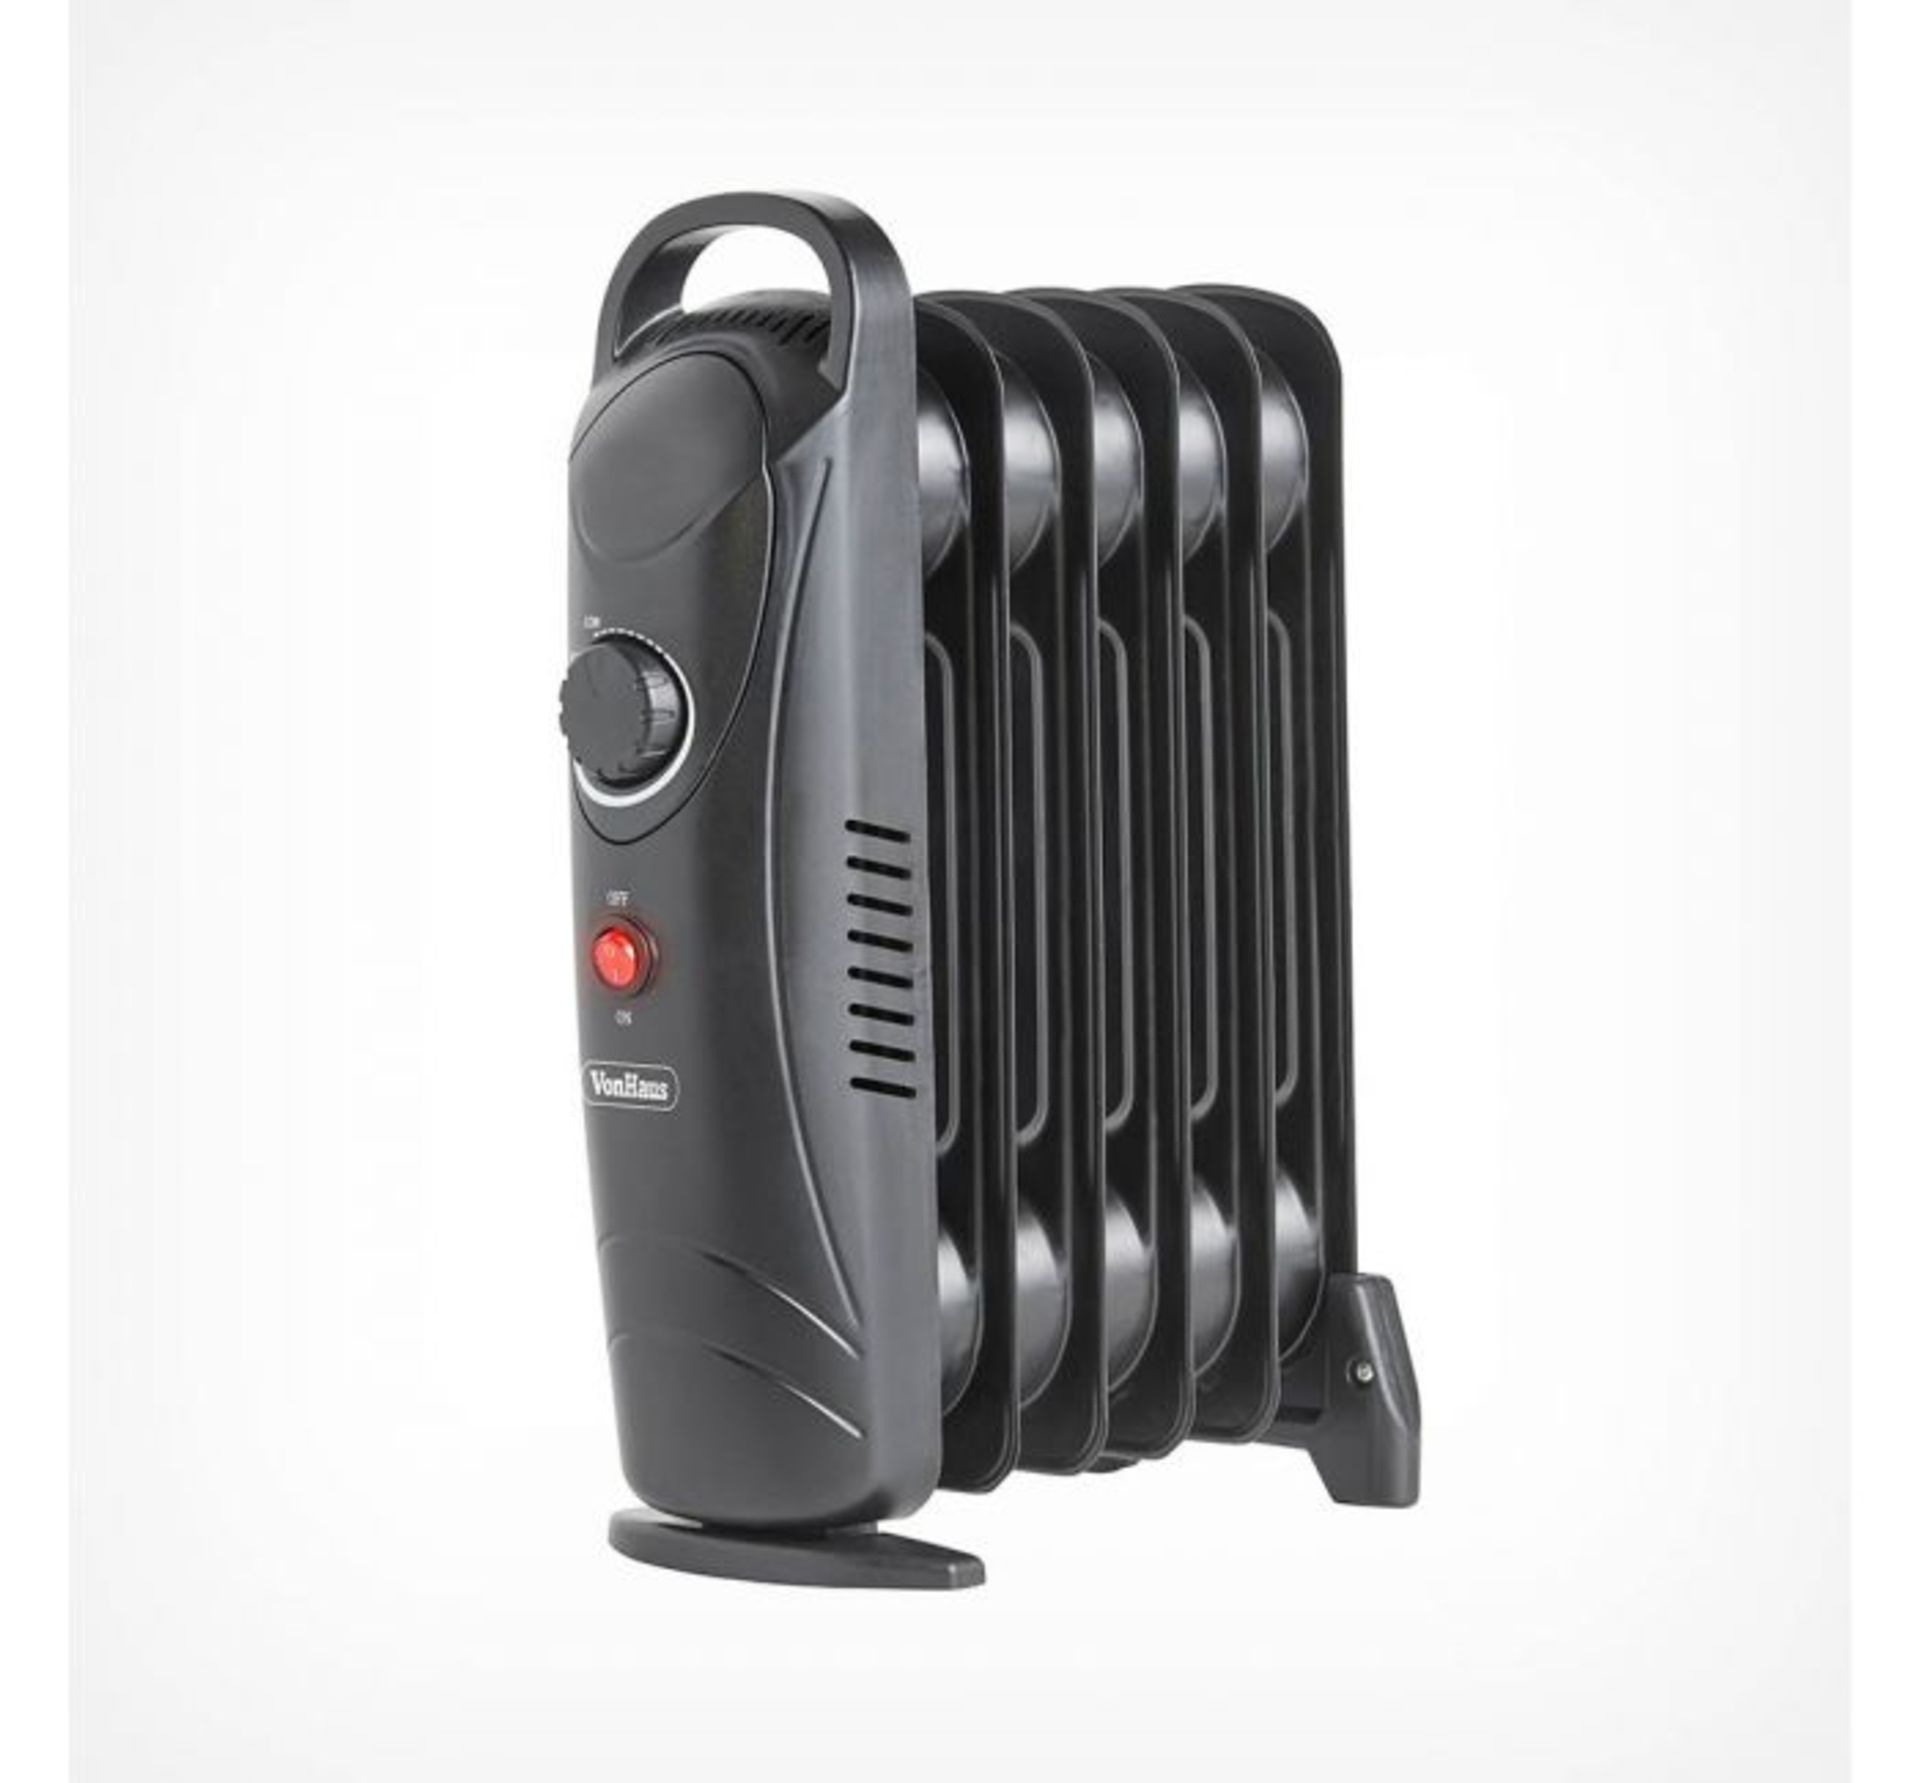 (AP285) 6 Fin 800W Oil Filled Radiator - Black Equipped with adjustable thermostat control to ... - Image 2 of 2